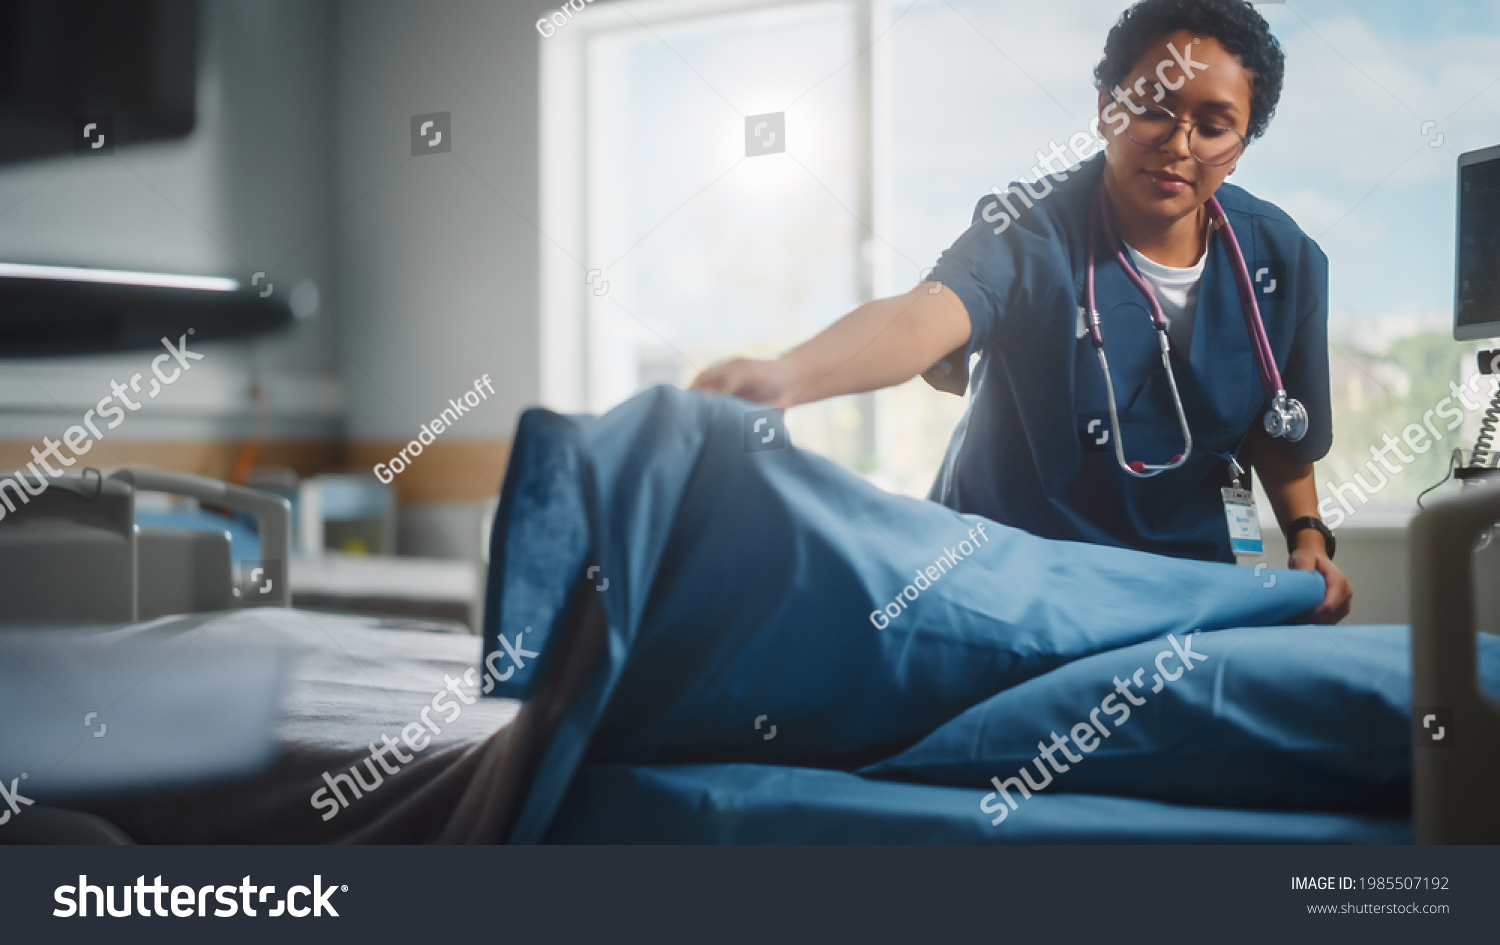 Hospital Ward: Beautiful, Professional Latin Black Nurse Working, Doing Bed, Cleaning Room After Happy Healthy Patients Recover and are Discharged Under Treatment of the Best Doctors. Sunny Room #1985507192